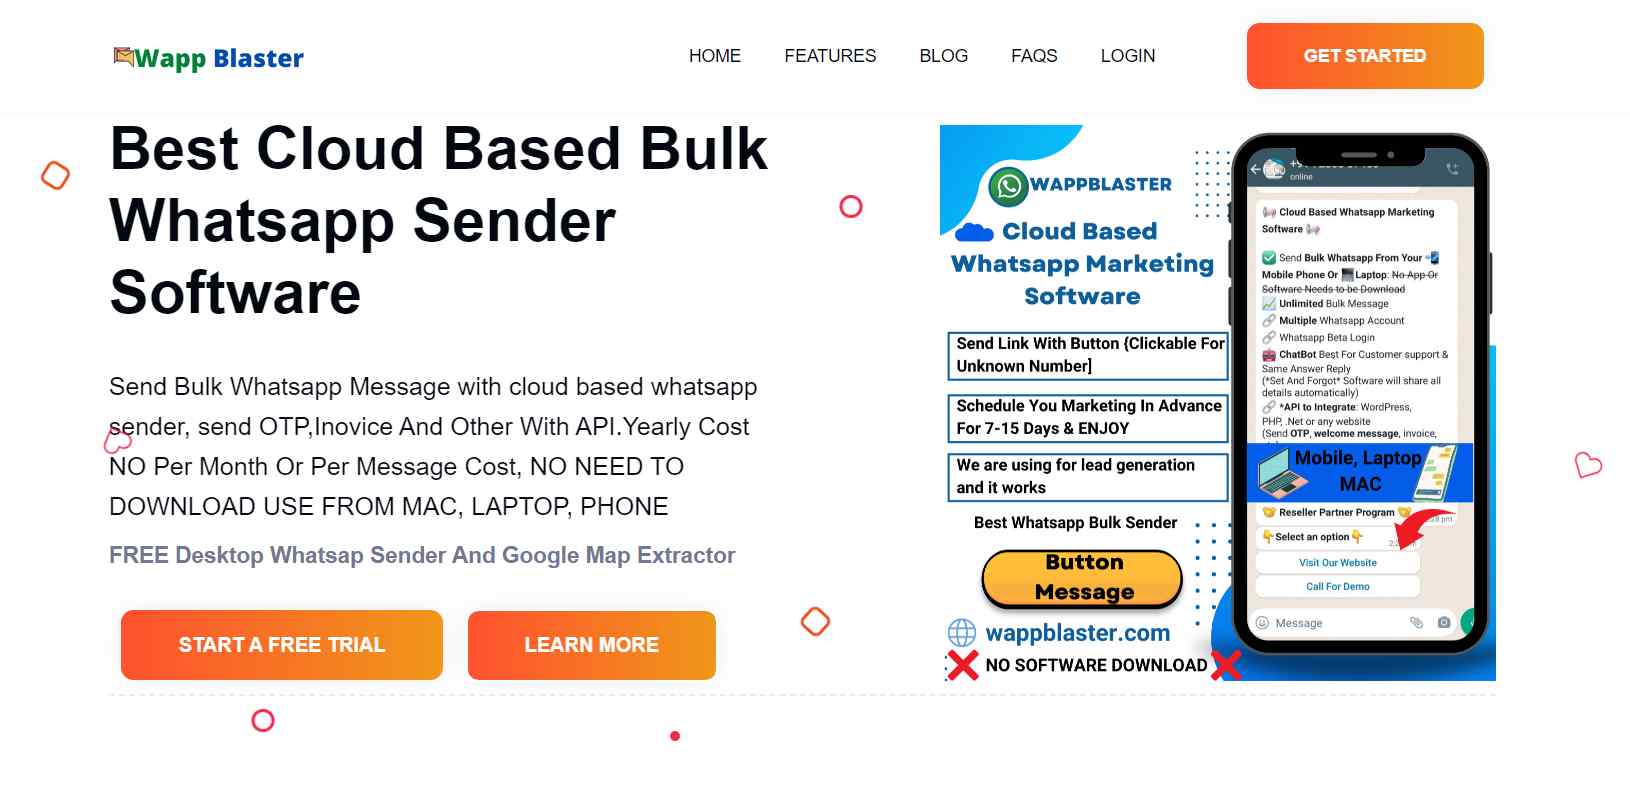 WappBlaster is advanced WhatsApp marketing software that helps businesses reach their targets.